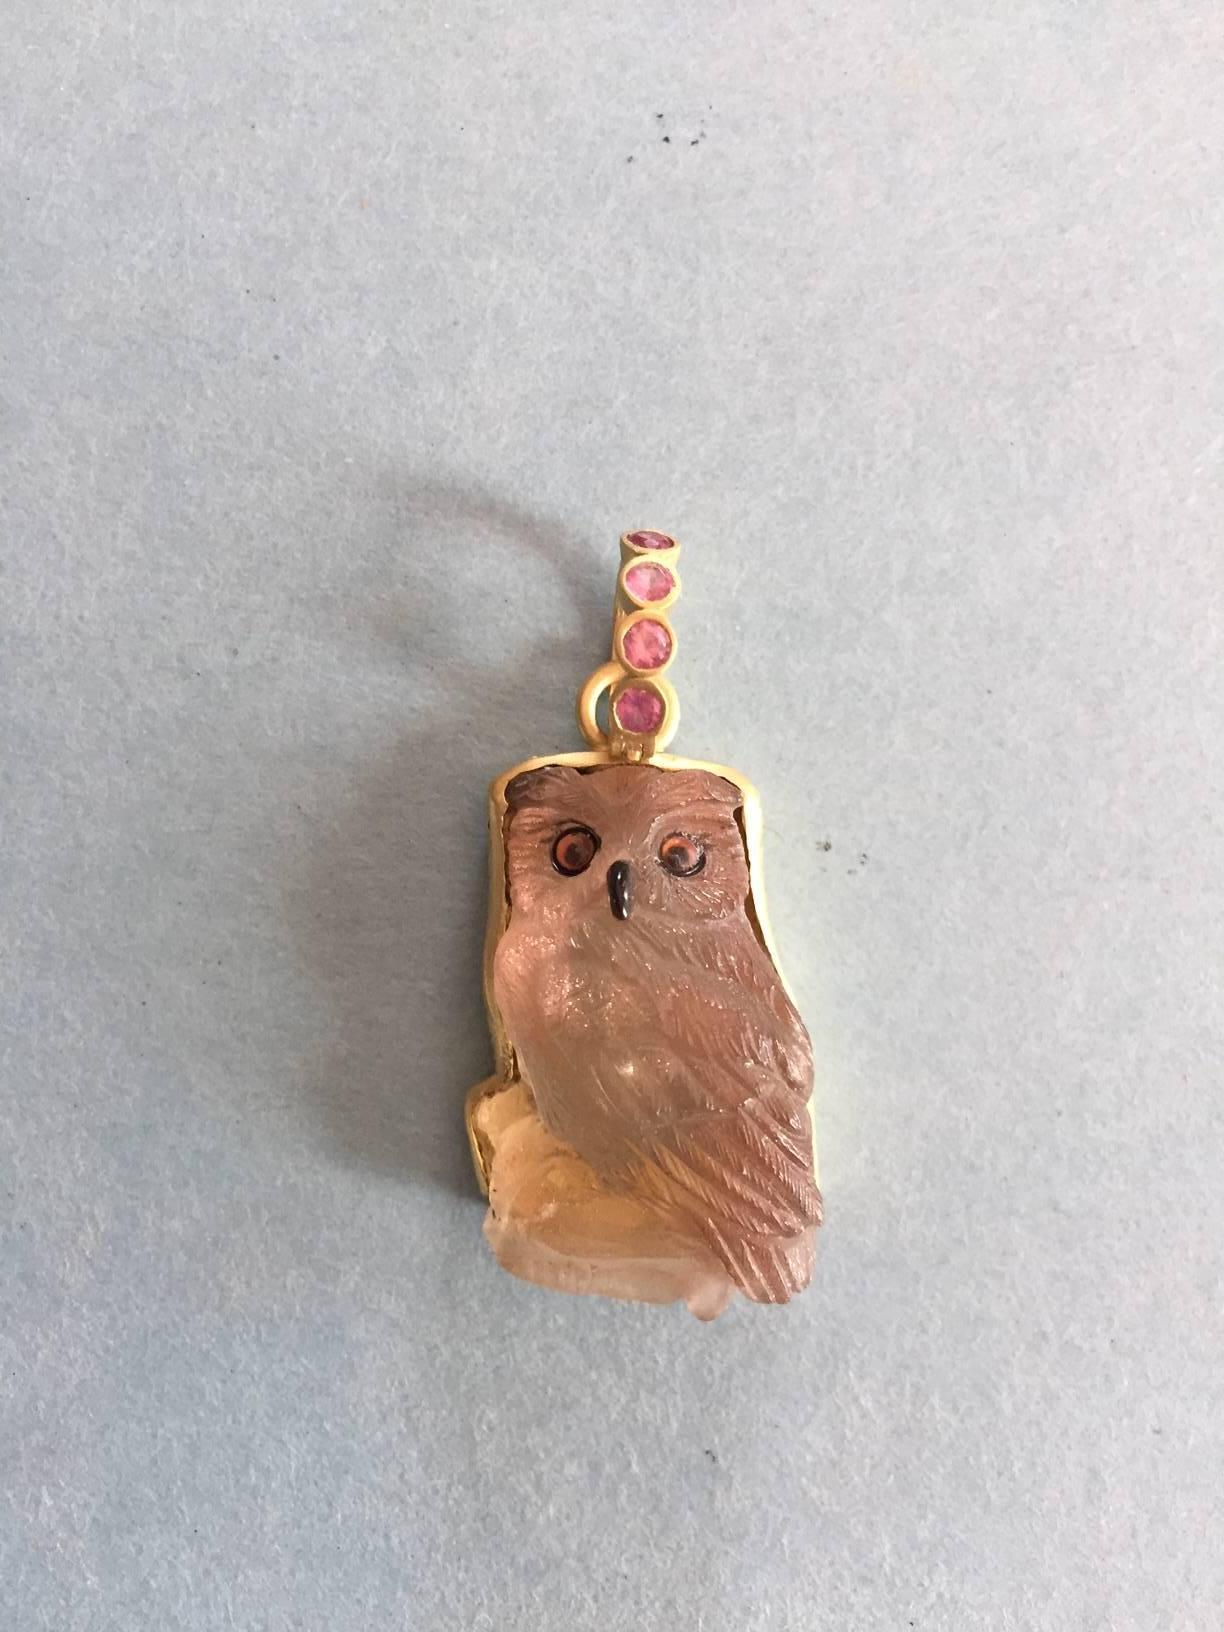 18 karat handsome moonstone owl pendant with rare pinkish glow set with carved onyx beak and painted citrine eyes
measures 1 and 1/2 